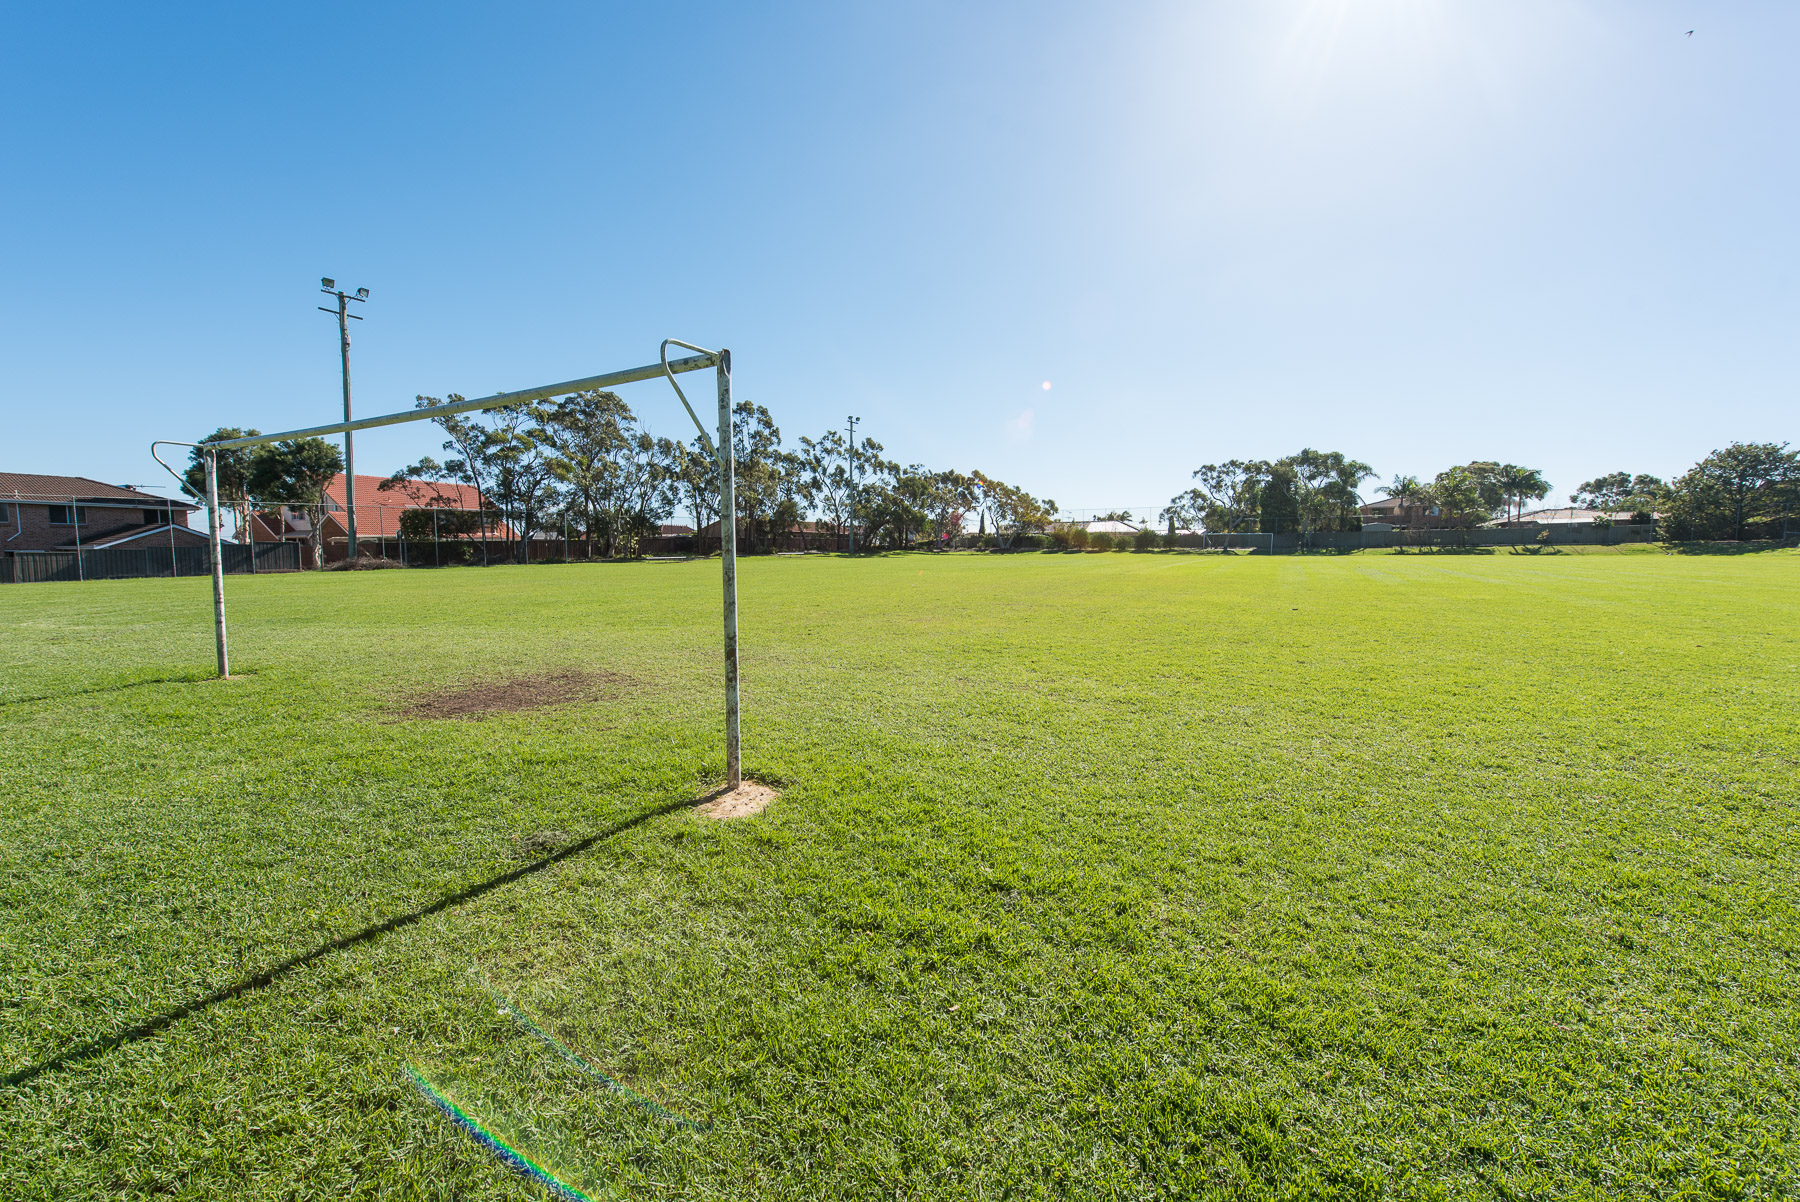 Goal post in sunny playing field